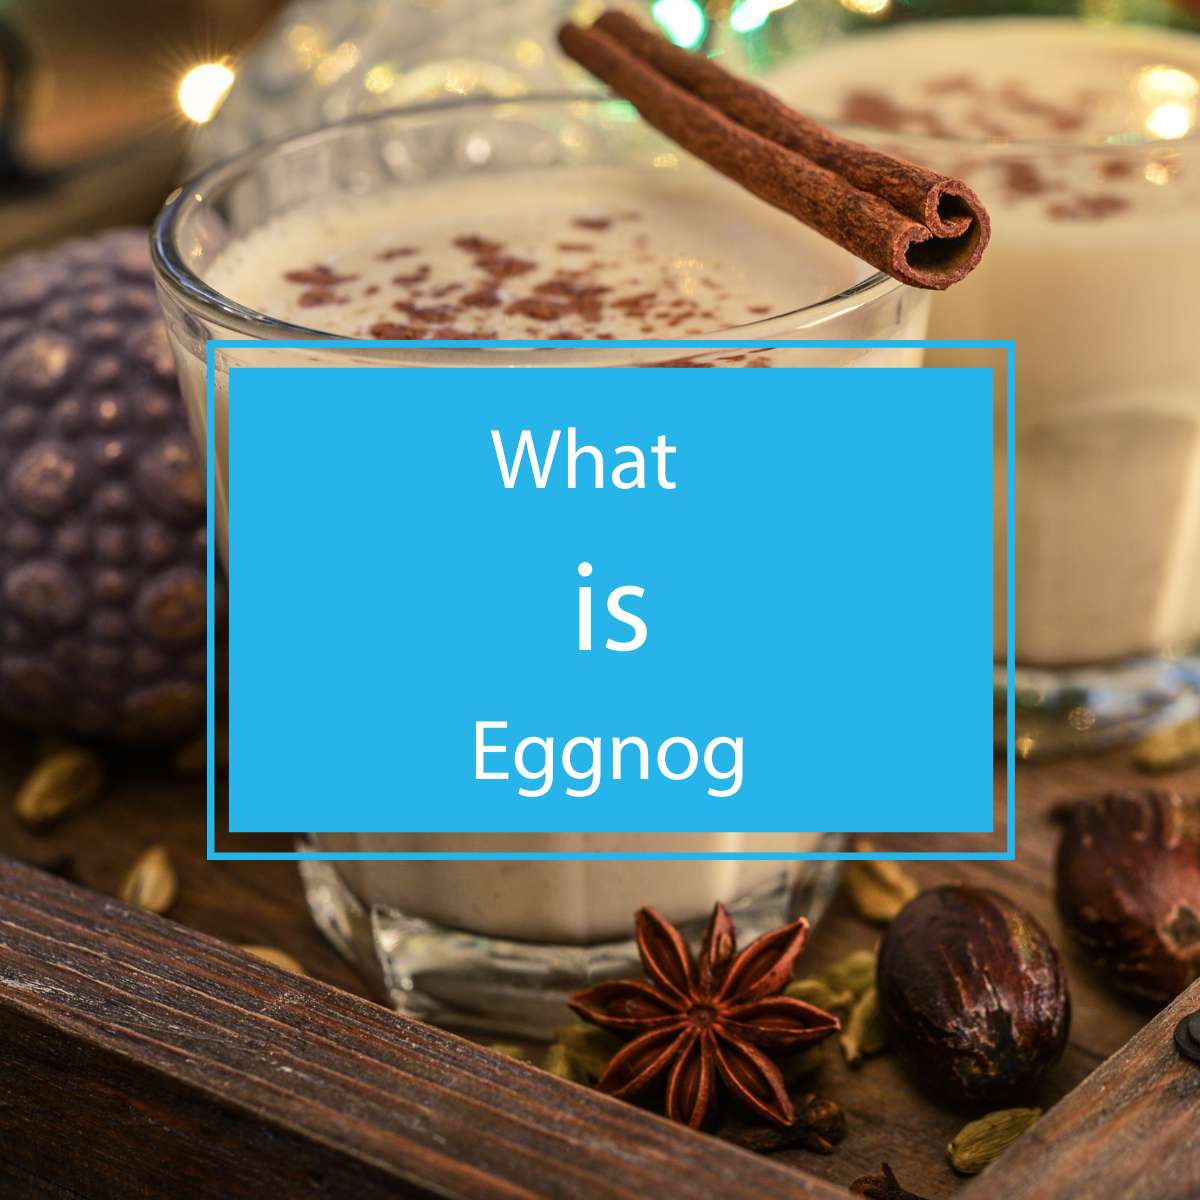 What is eggnog